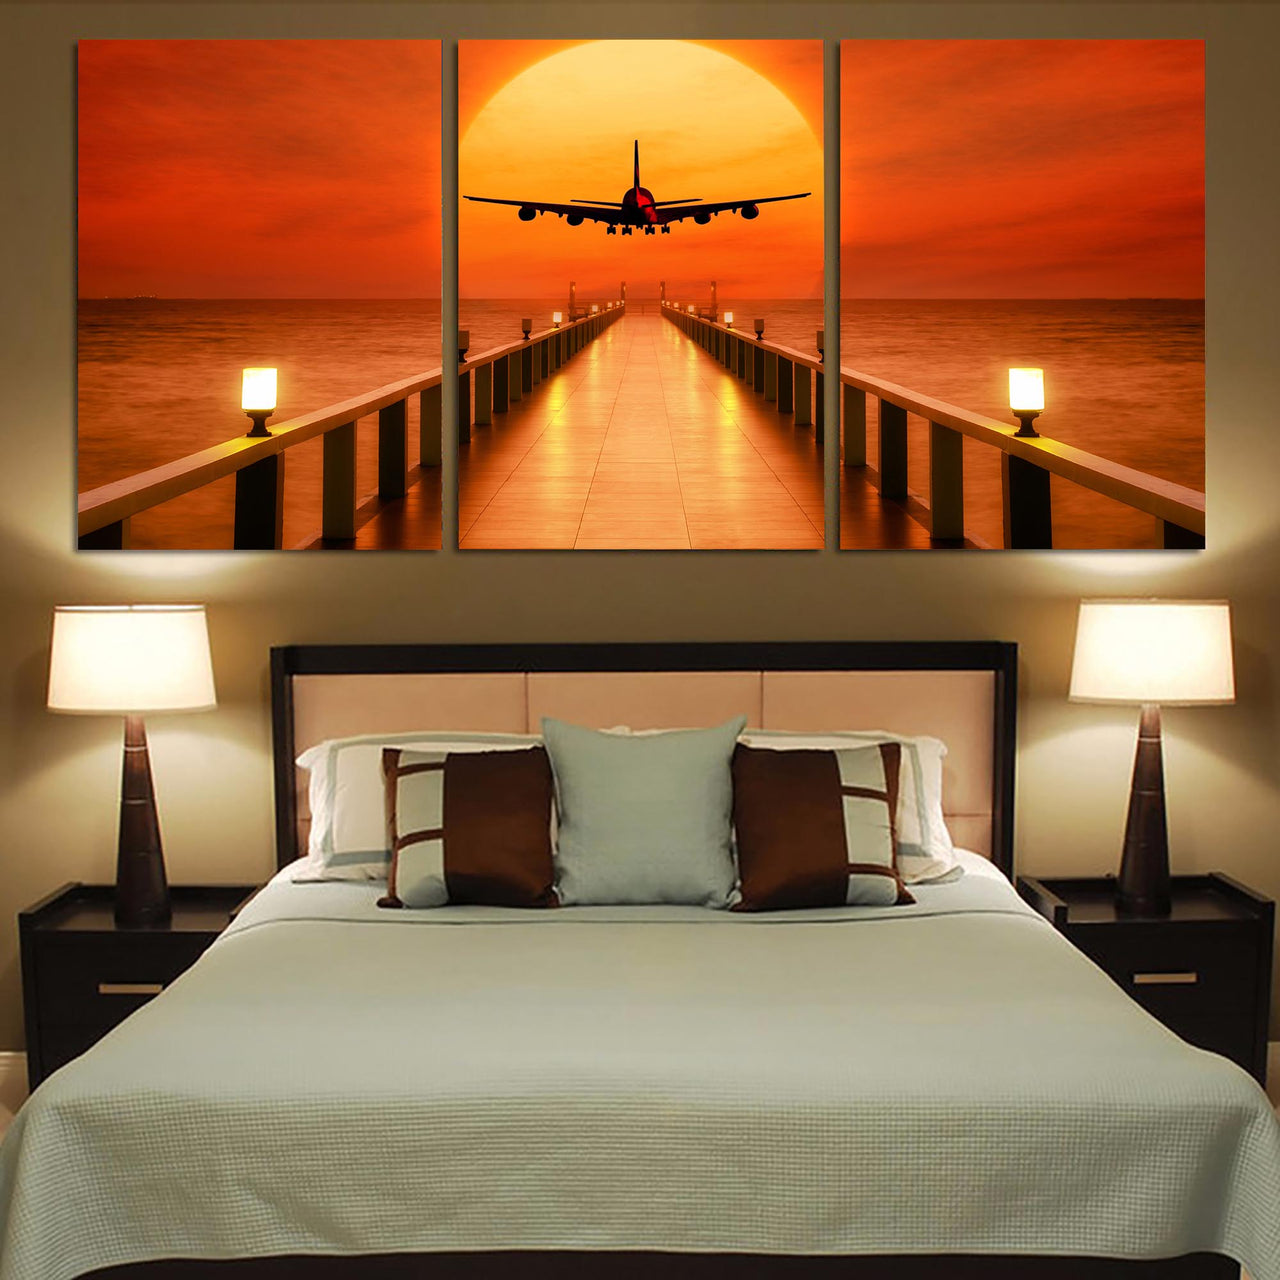 Airbus A380 Towards Sunset Printed Canvas Posters (3 Pieces)